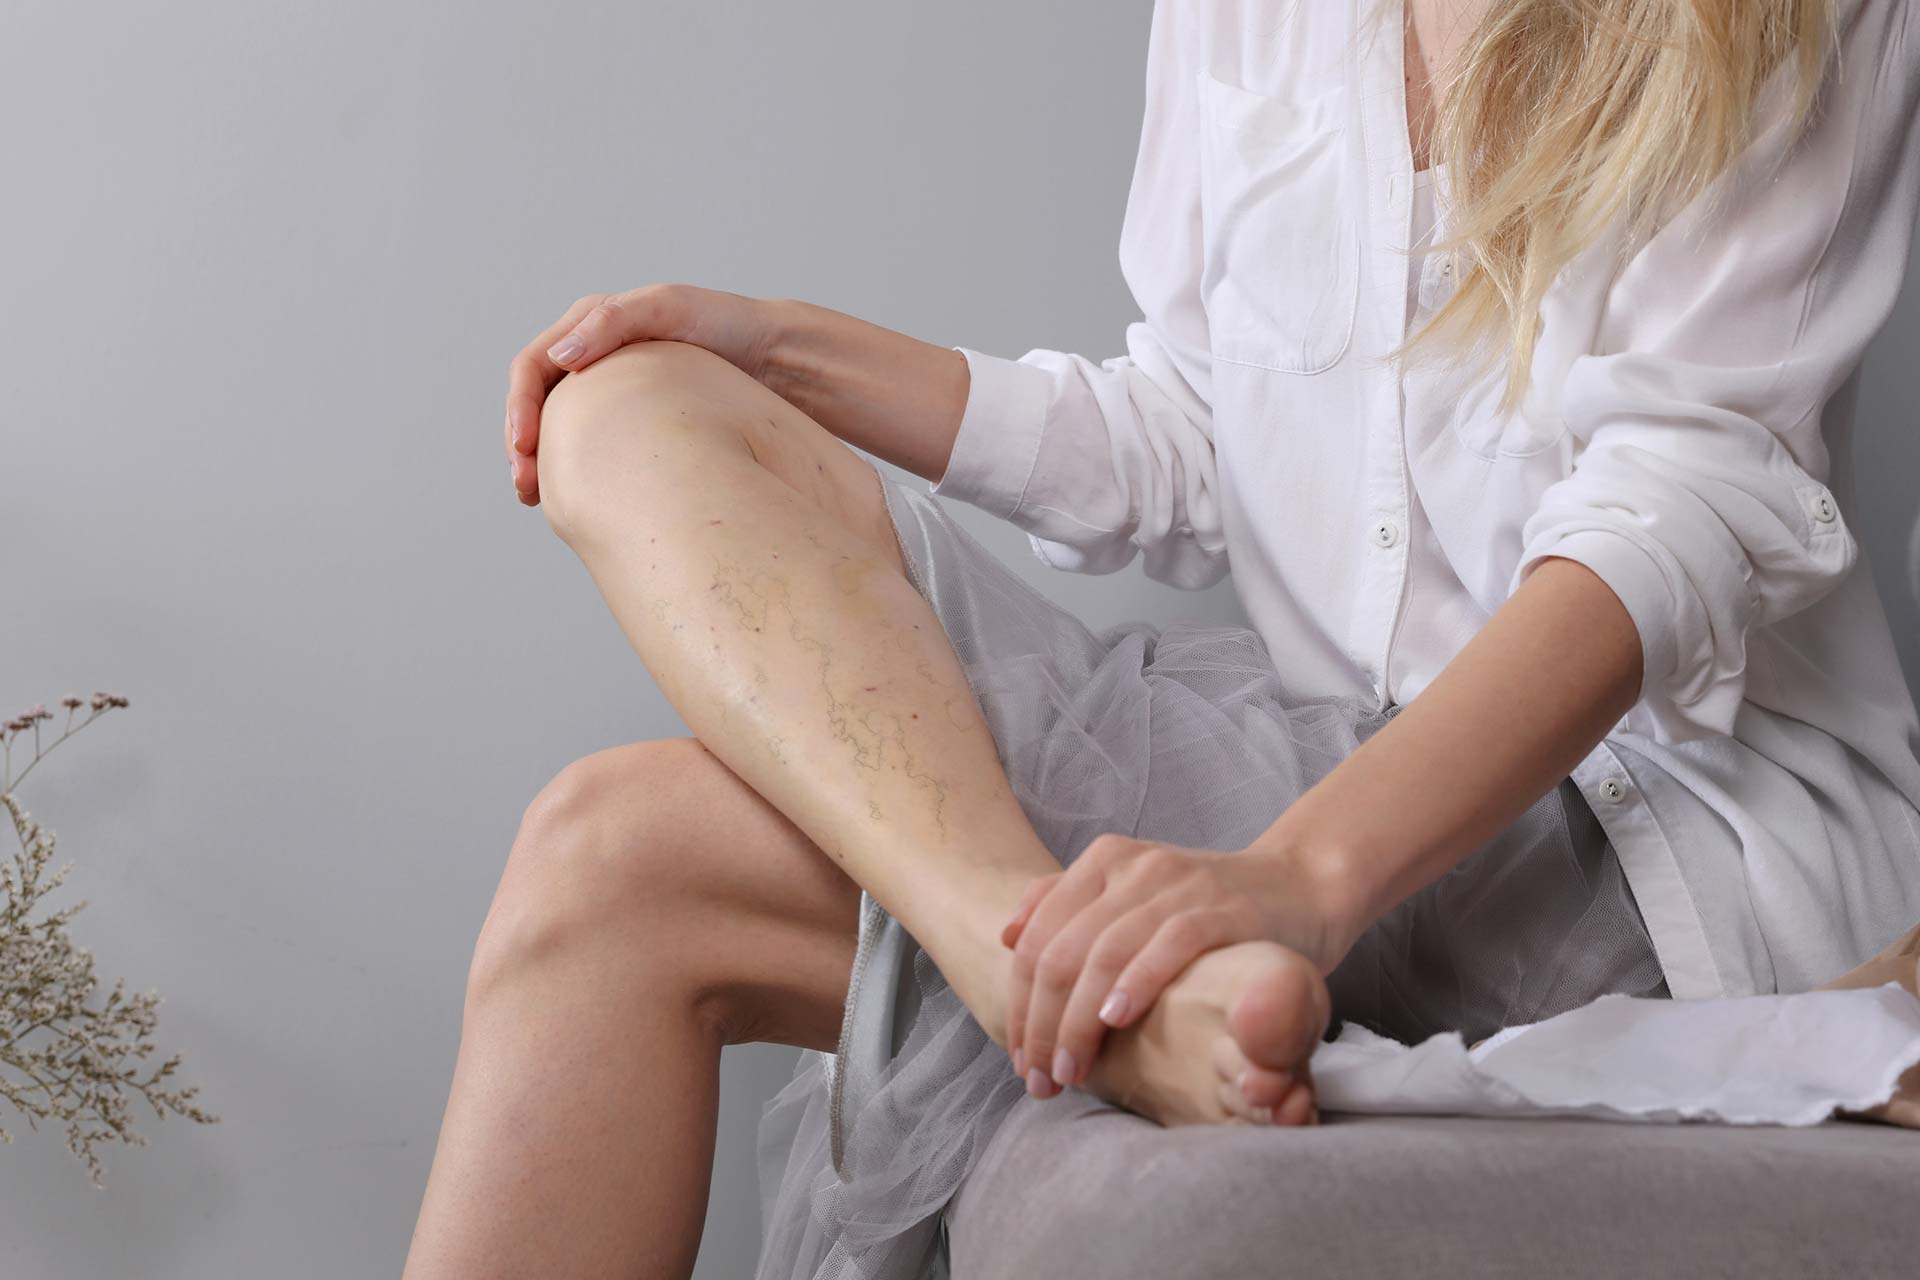 What are Spider Veins, and Should You Be Worried About Them?